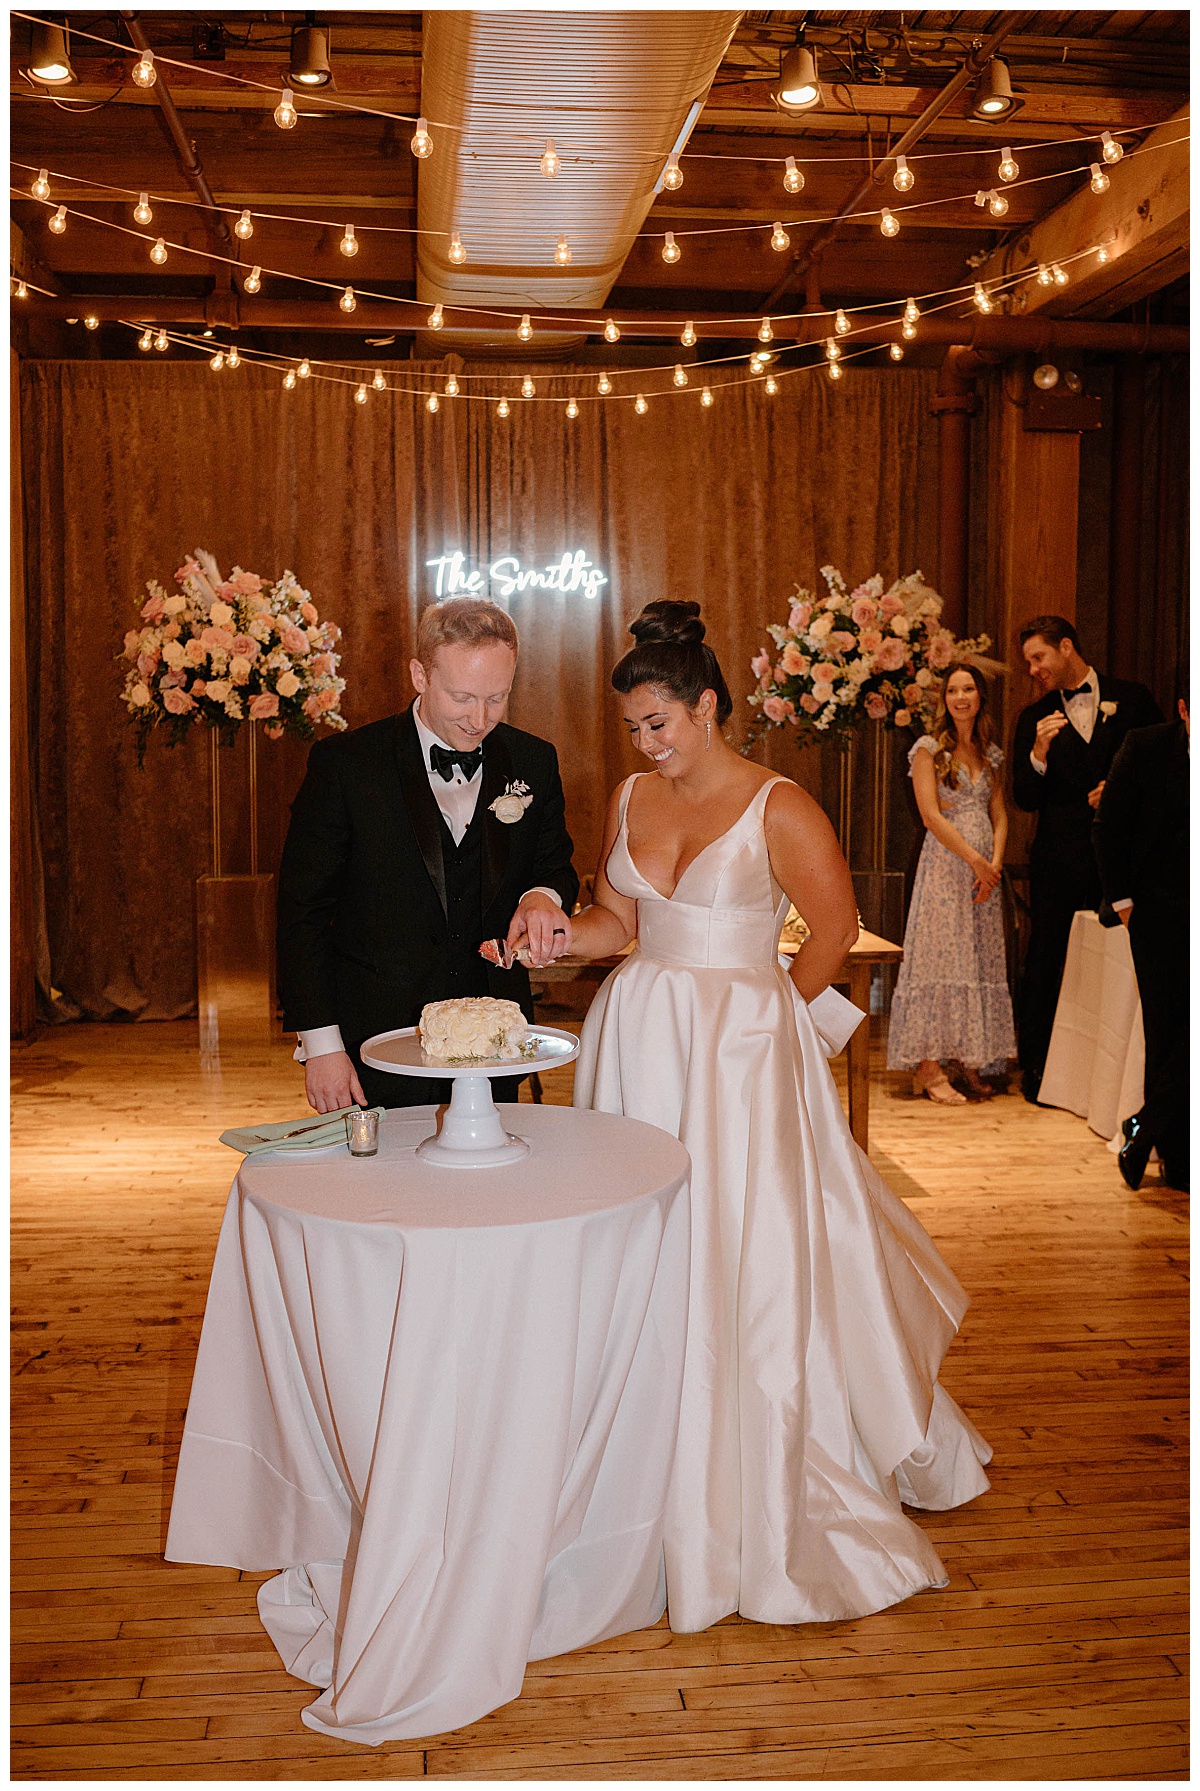 bride and groom cut cake together by Chicago photographer